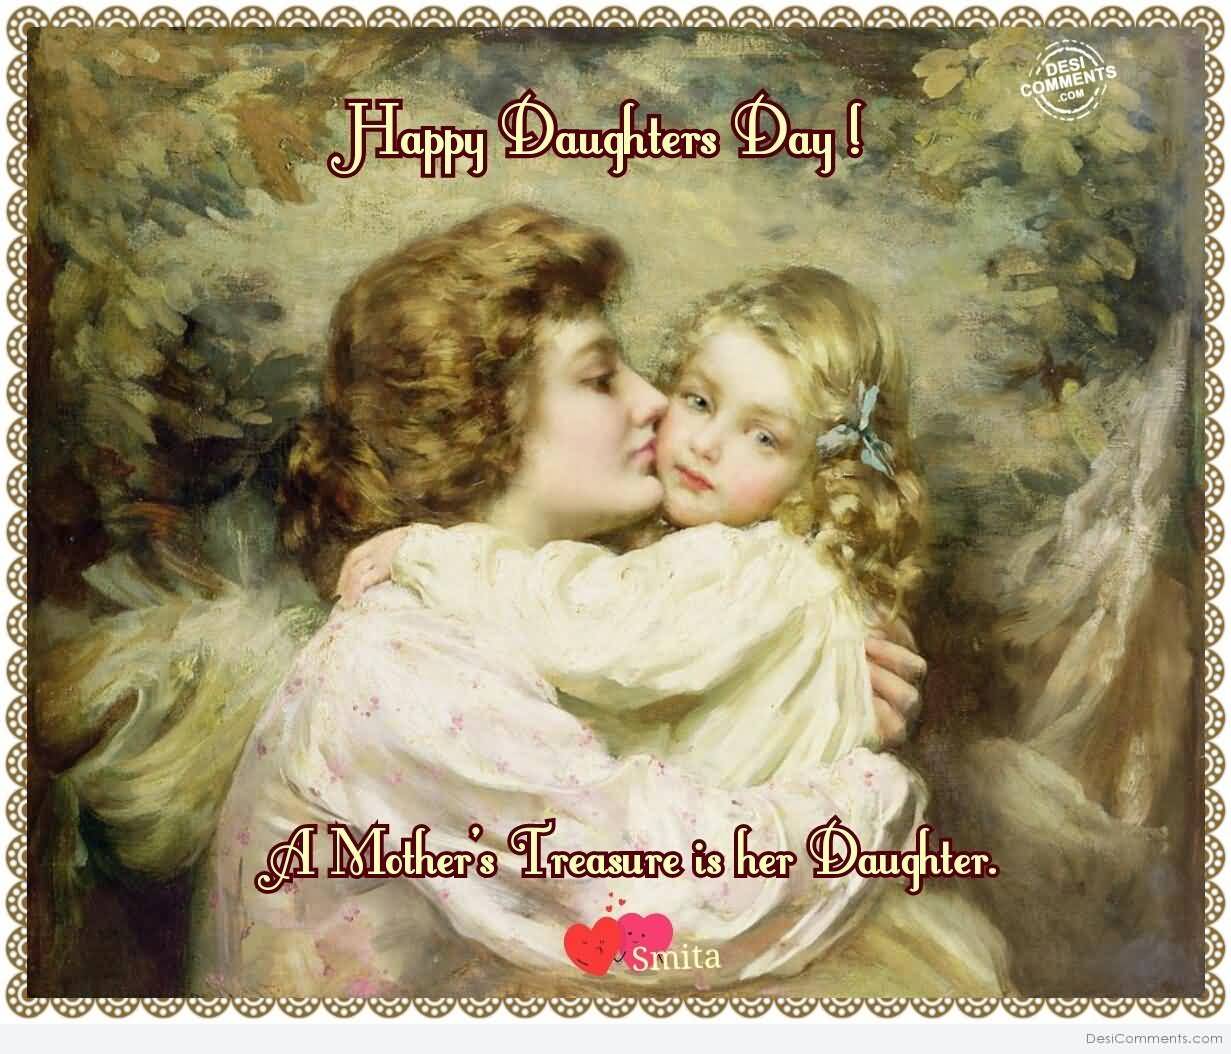 Happy Daughters Day A Mother's Treasure Is Her Daughter